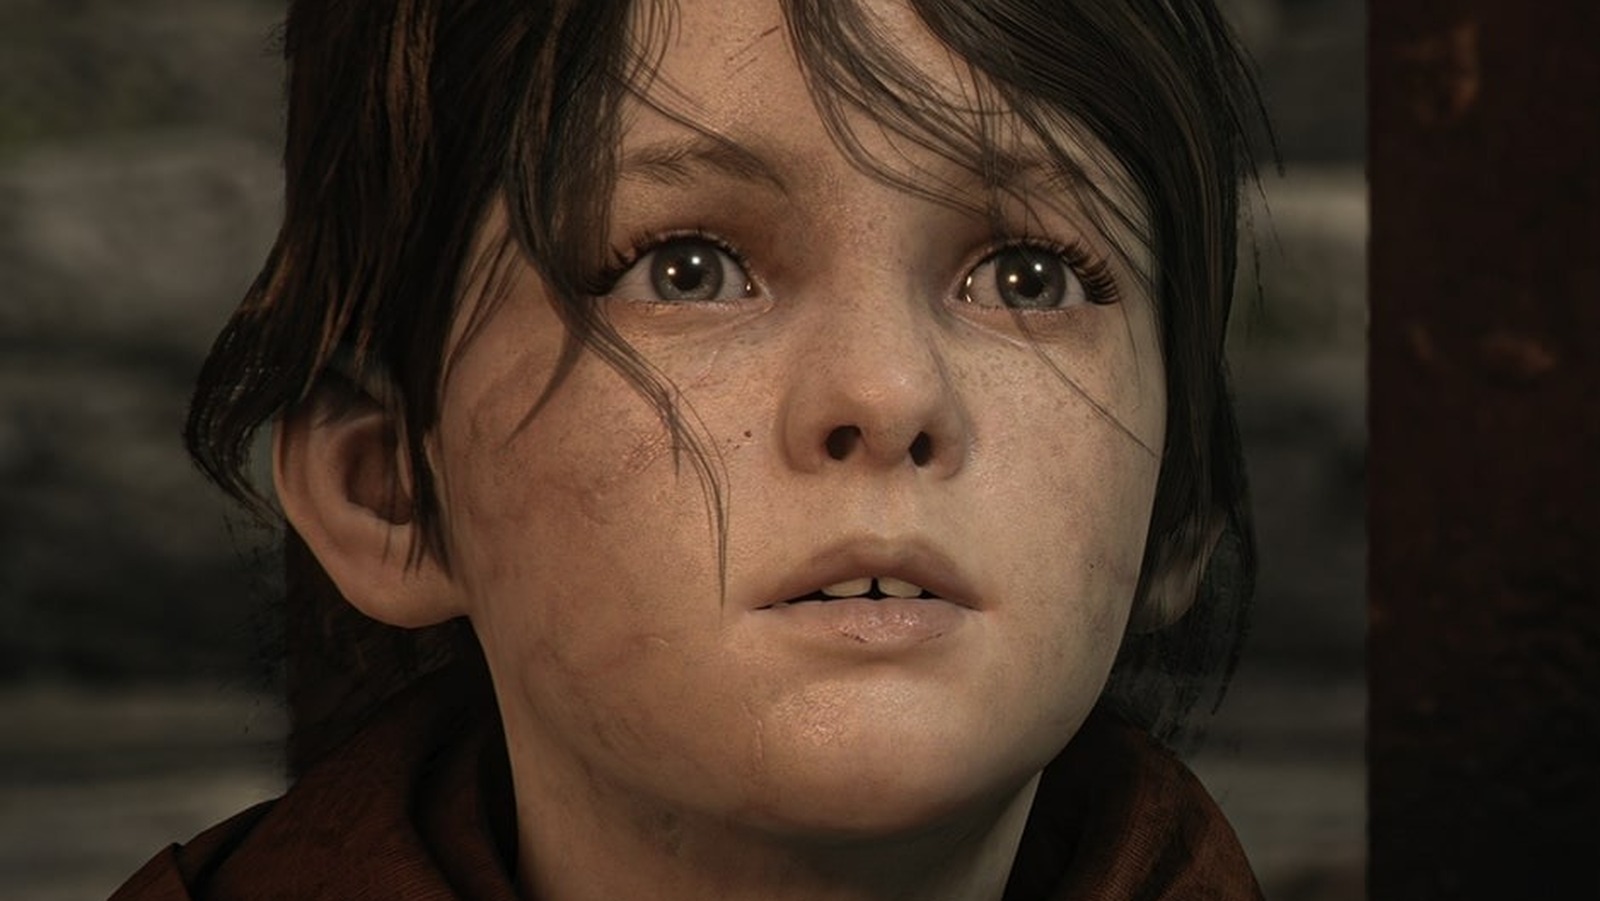 Sony PlayStation 5 A Plague Tale: Requiem PS 5 Game Deals PS5 A Plague Tale  Requiem